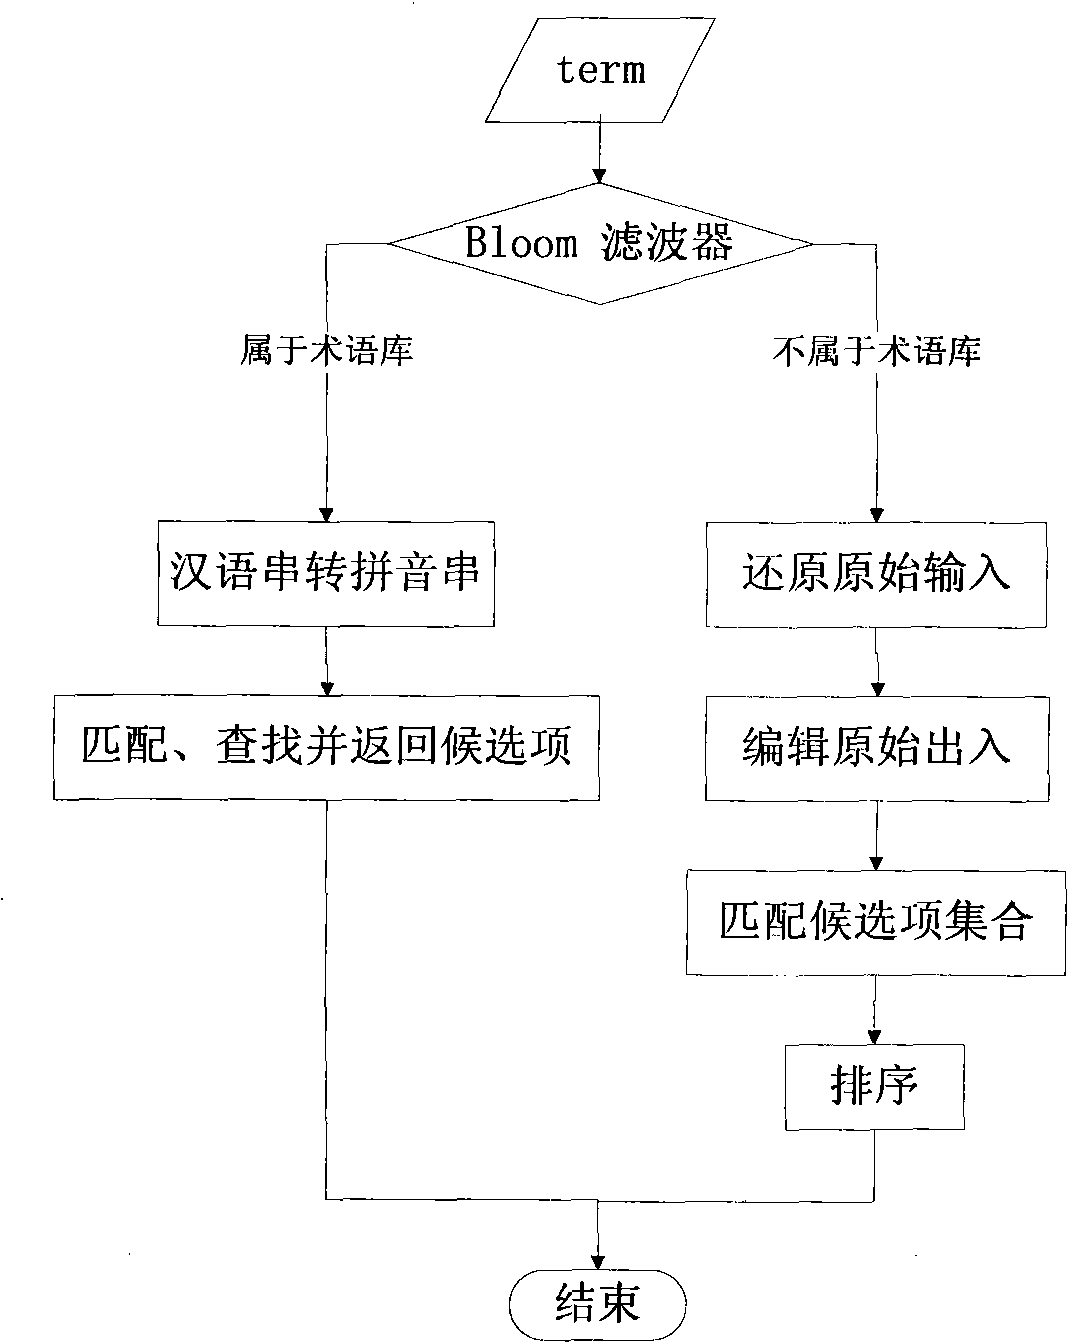 Chinese term automatic correction method in input process